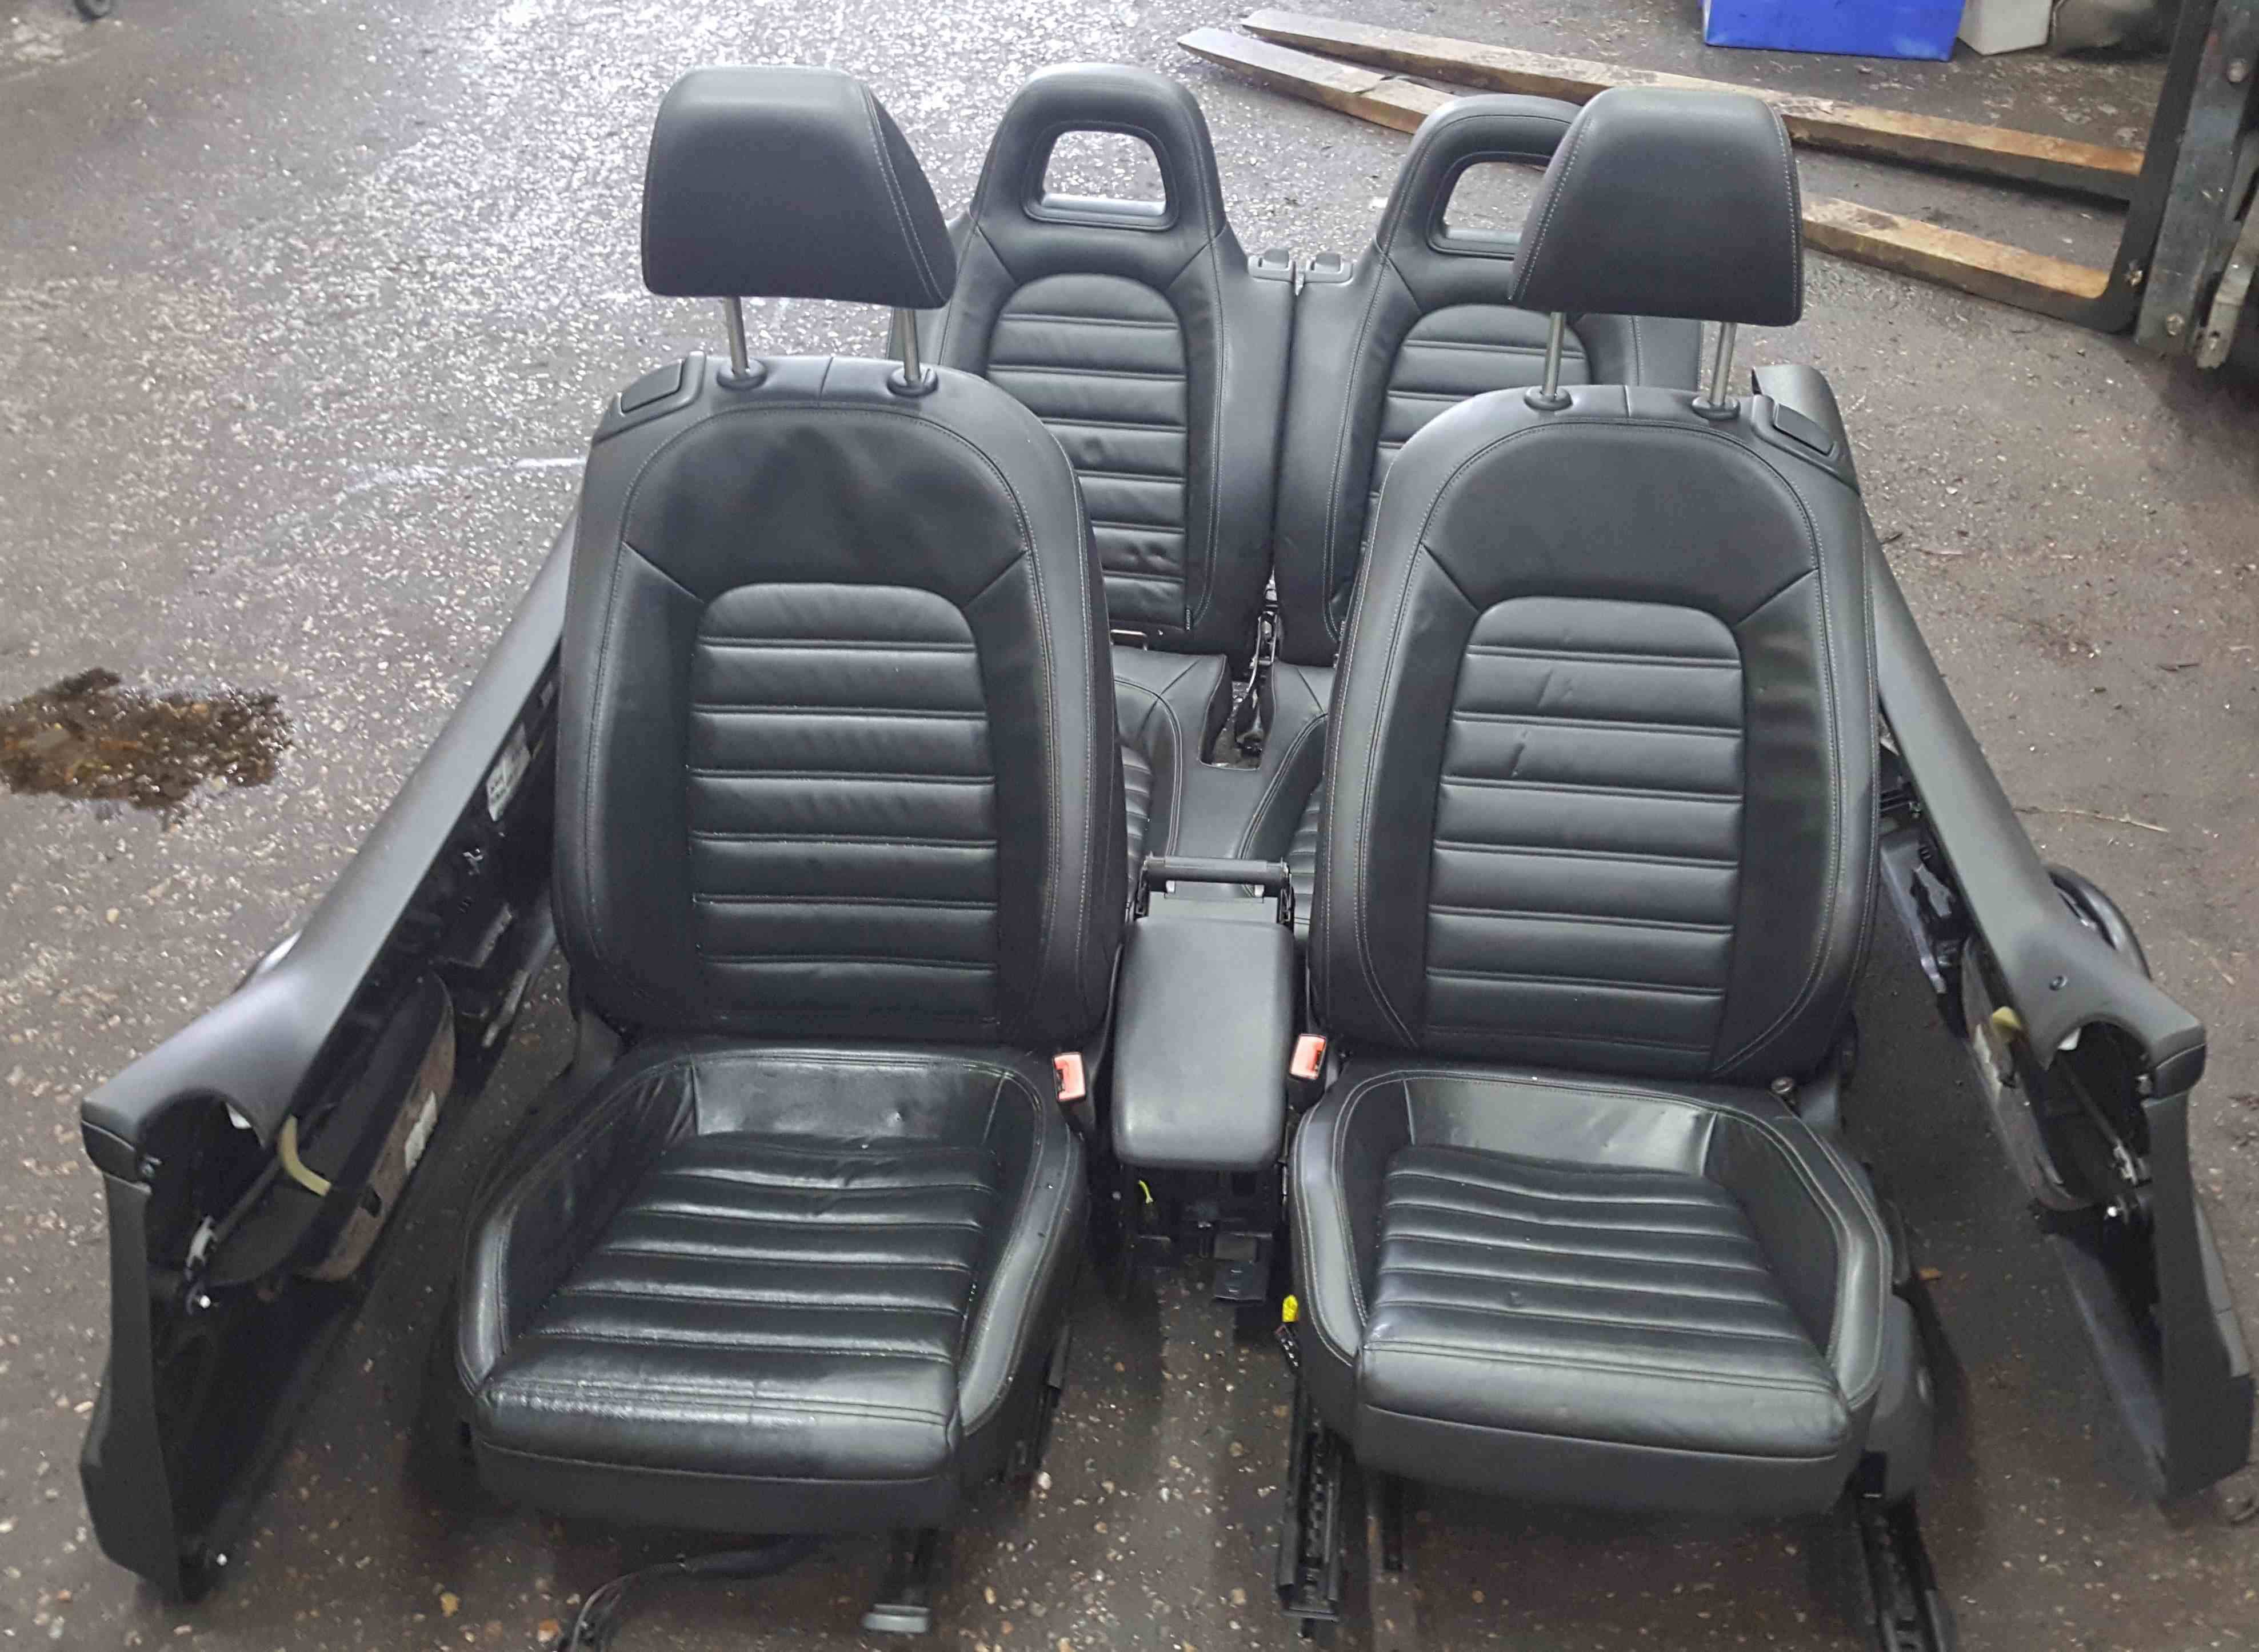 Volkswagen Scirocco 2008-2014 Full Leather Interior Black Seats Chairs 2 Cards